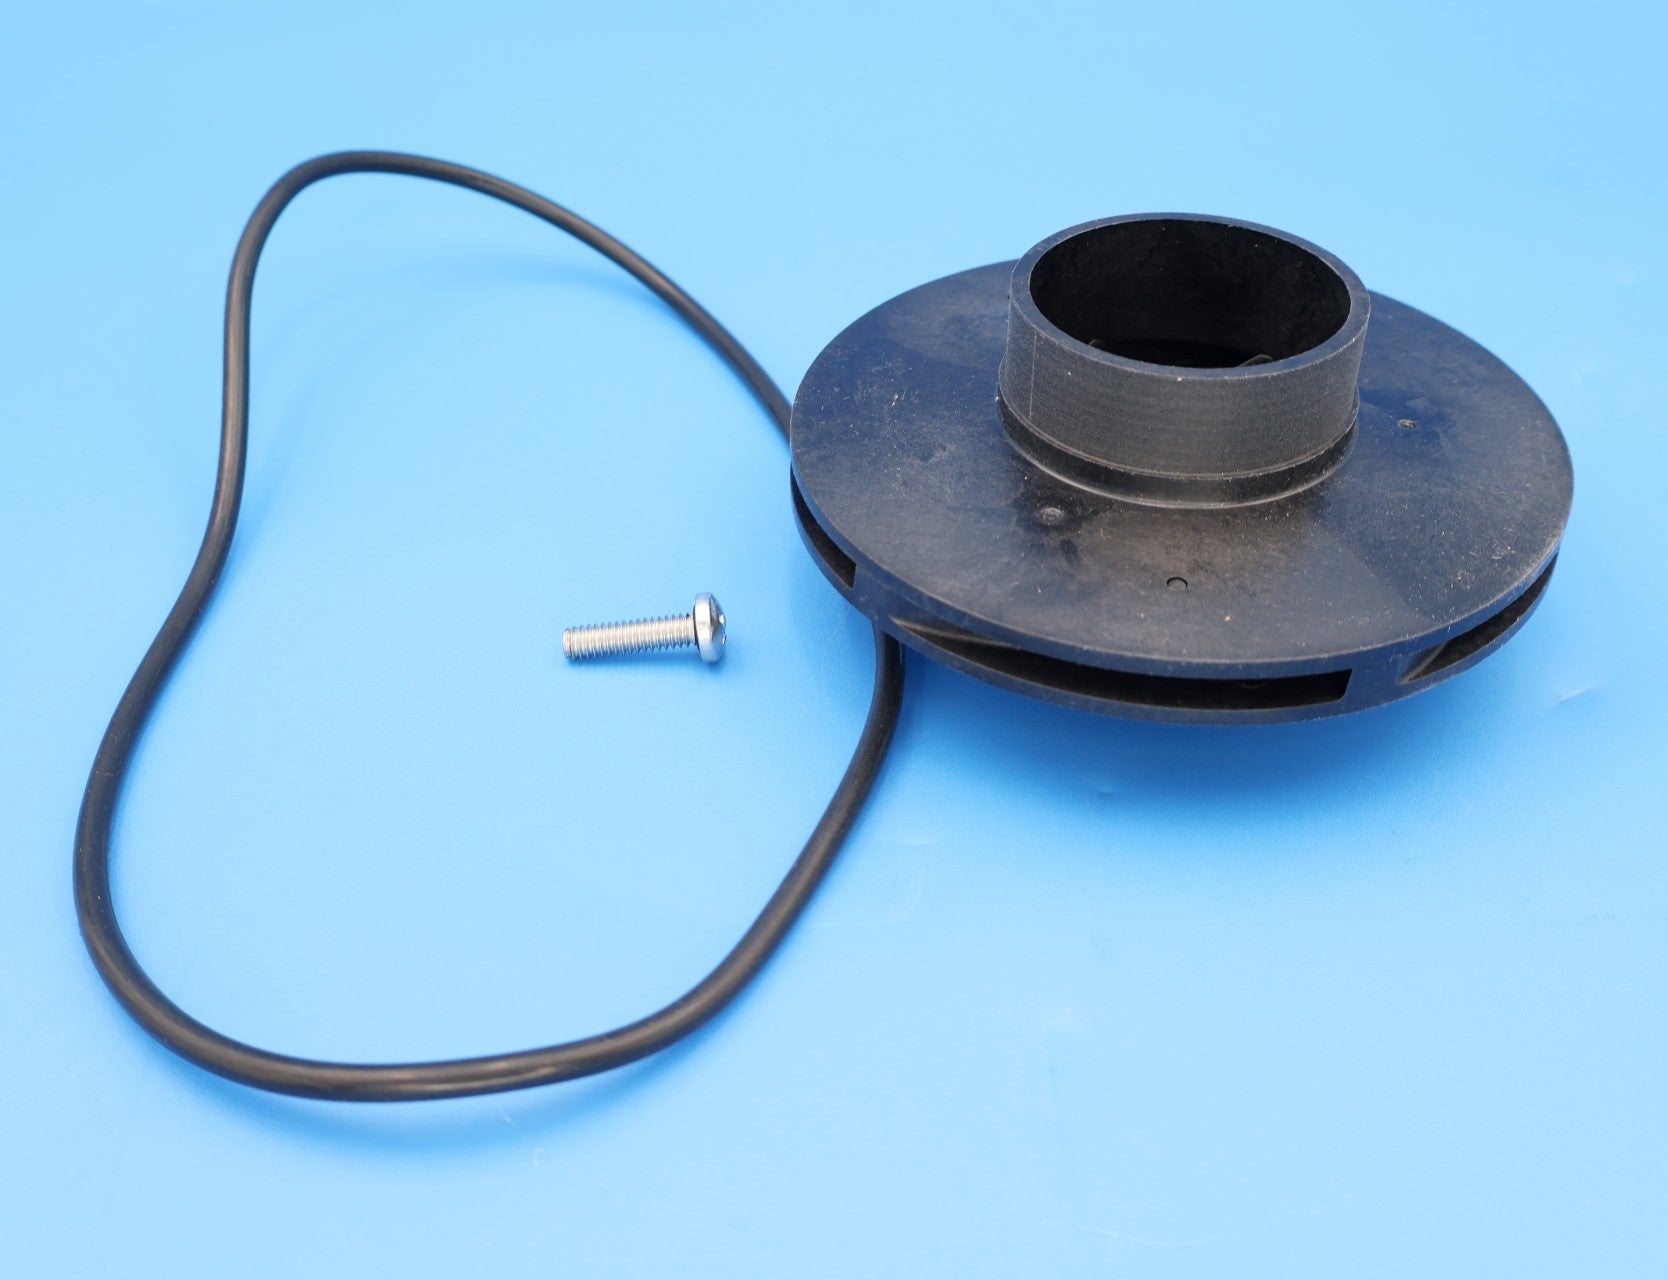 Jandy Impeller Replacement for VSFHP270DV2A R0808300 - Pool Pump Parts - img-2